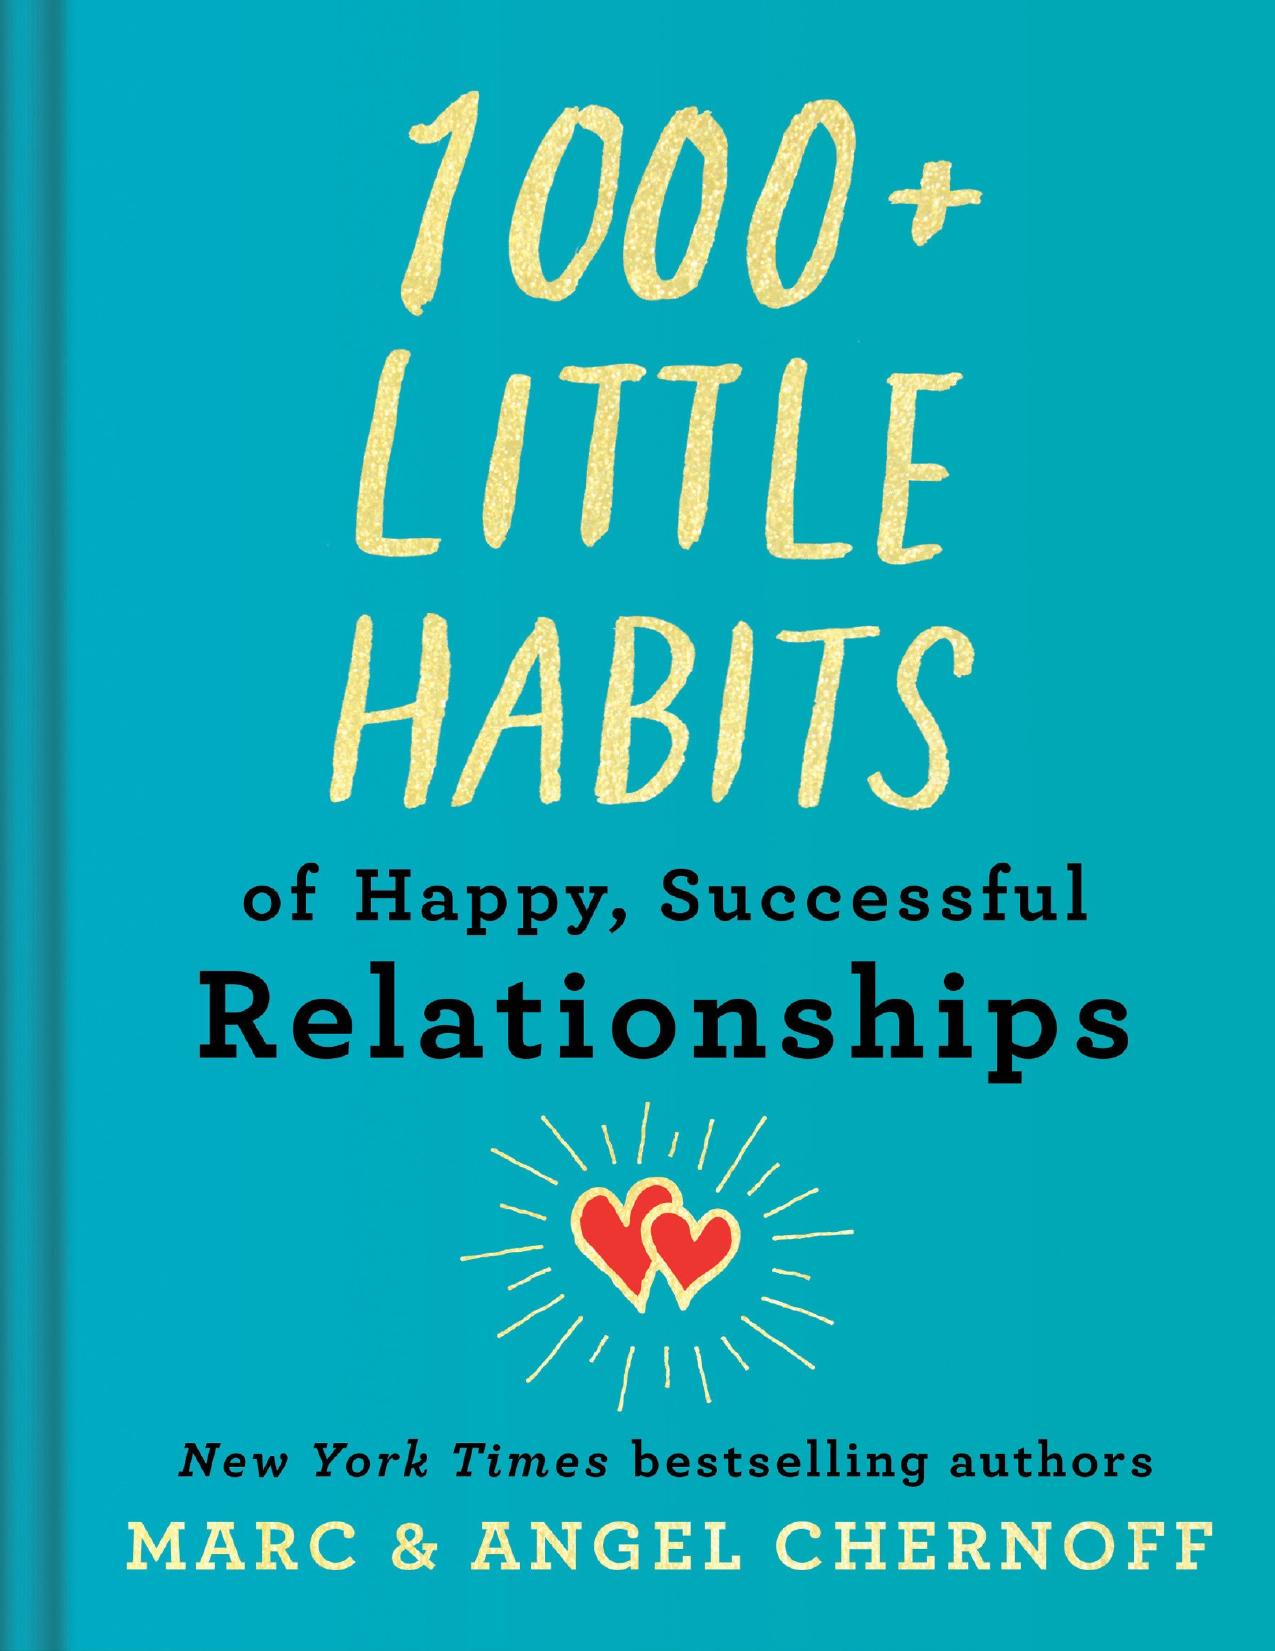 1000+ Little Habits of Happy, Successful Relationships by Marc Chernoff & Angel Chernoff